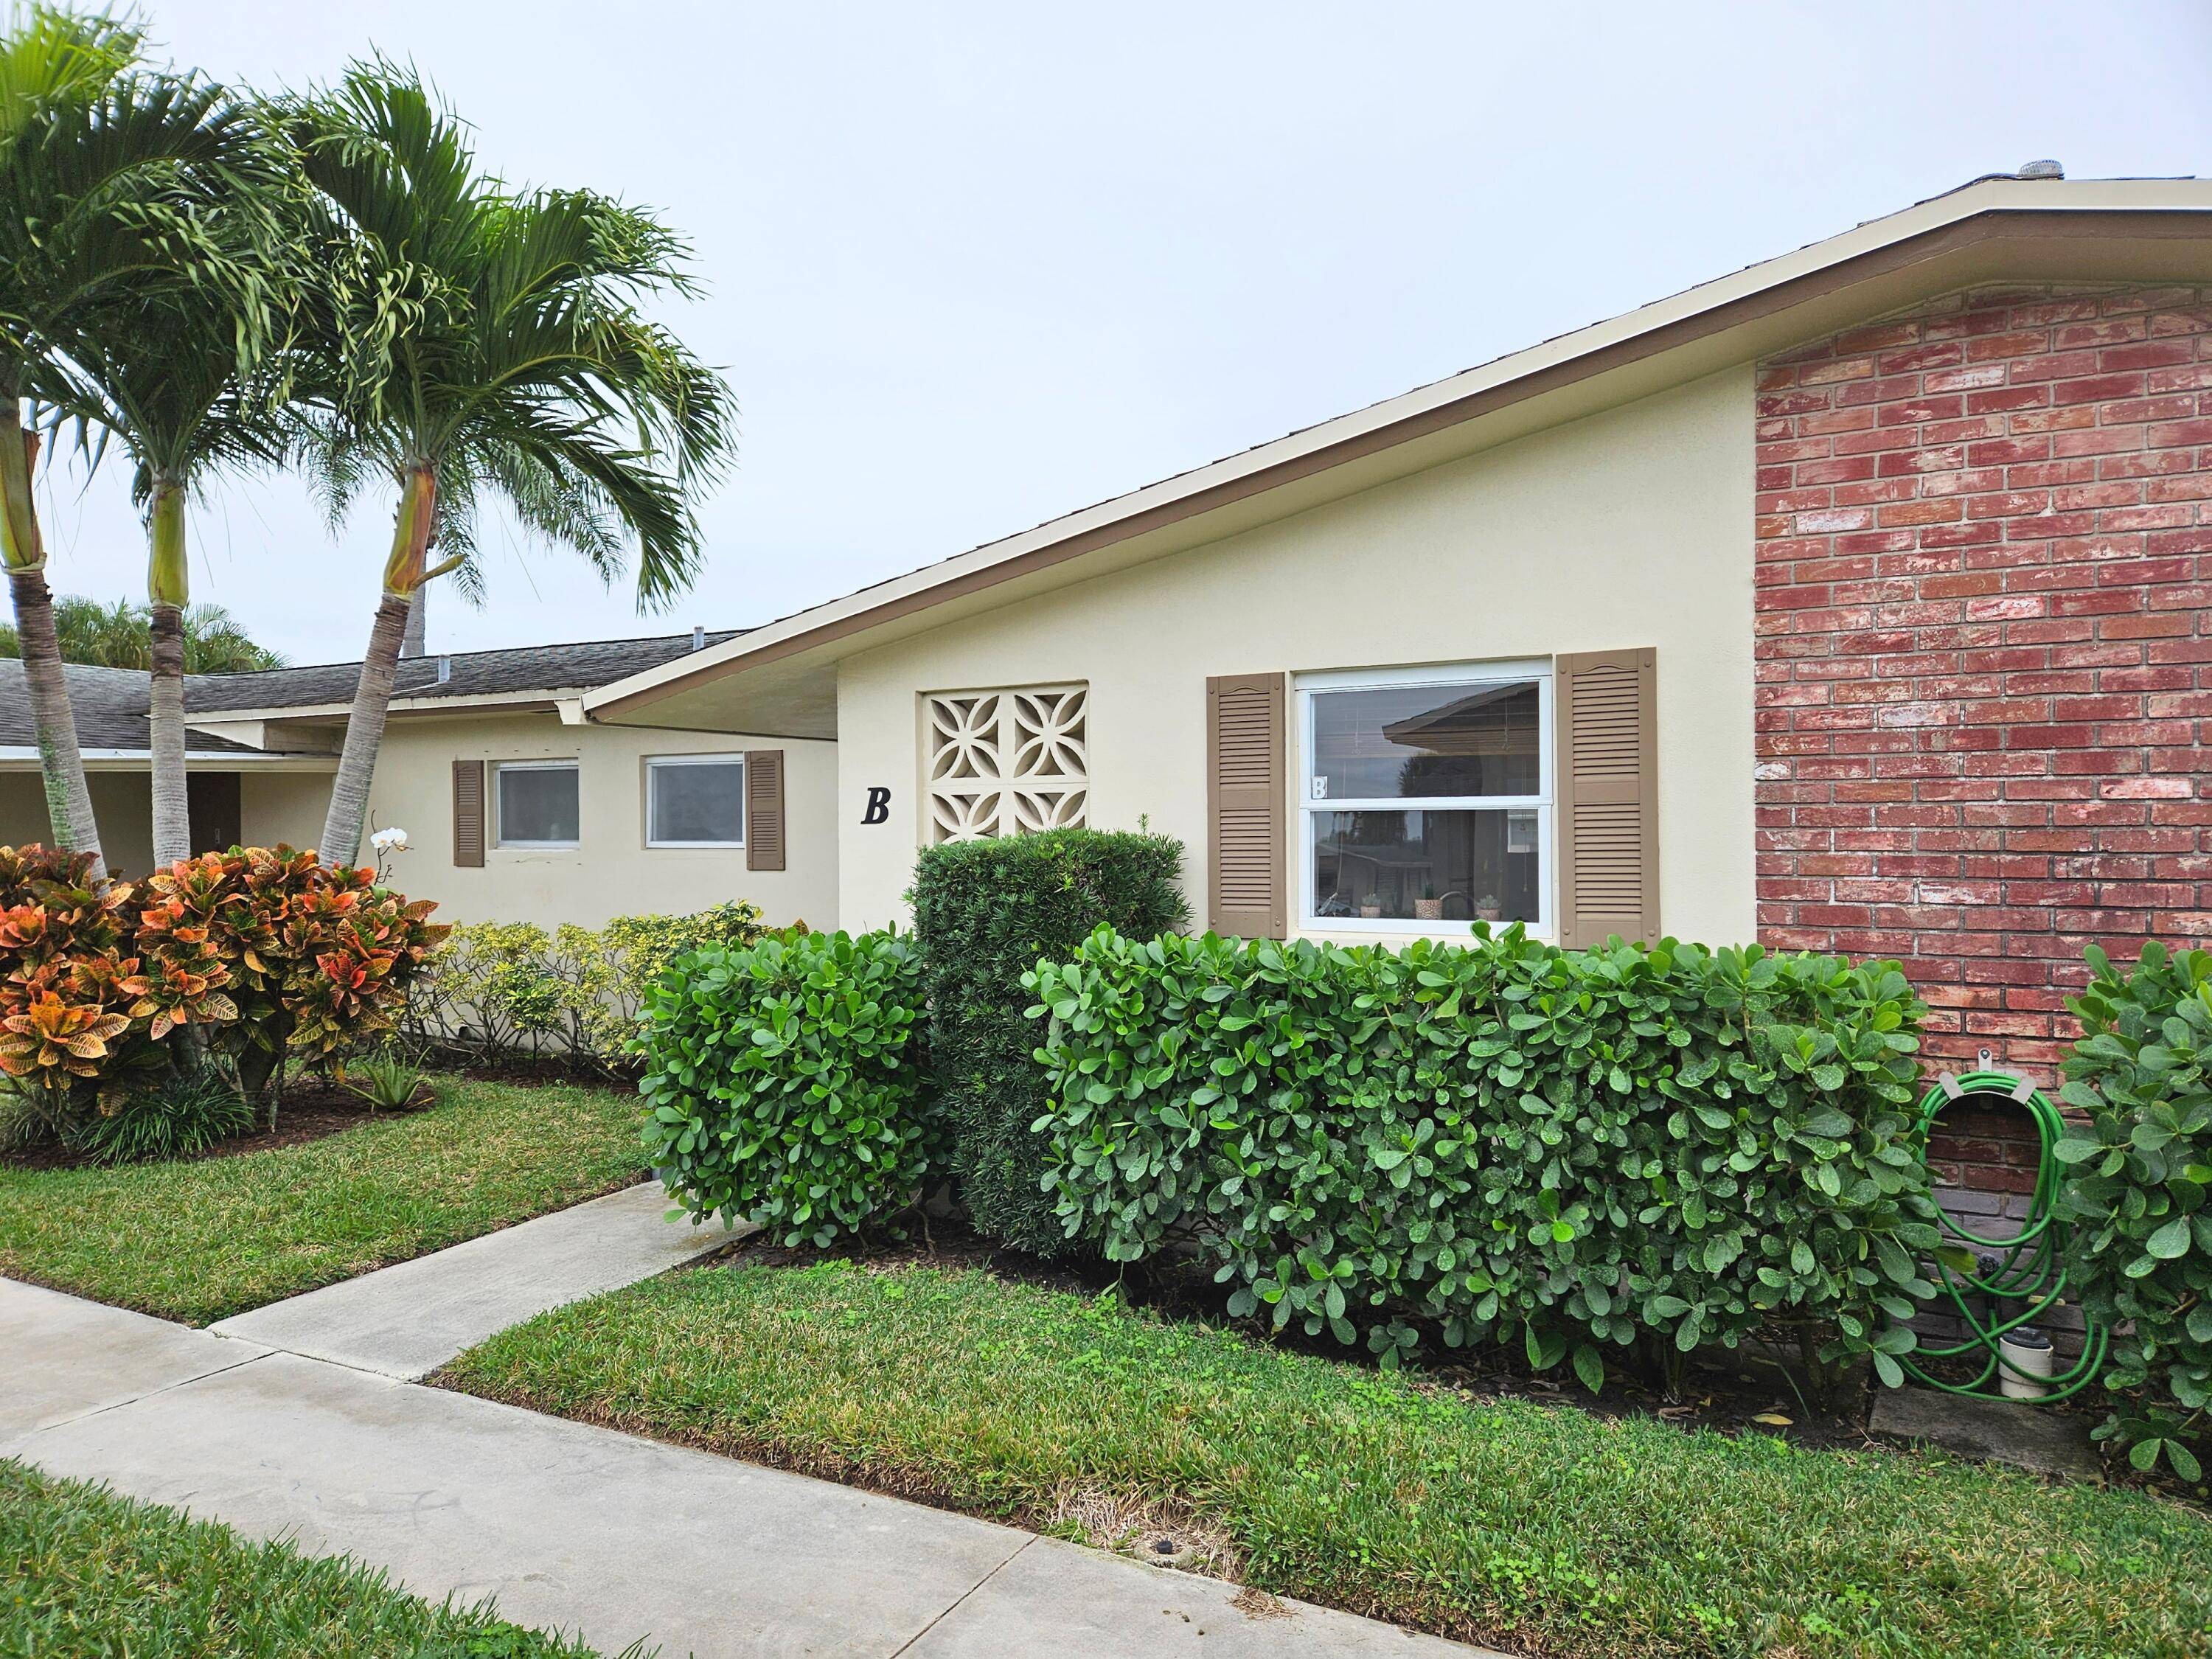 Beautifully maintained, fully renovated 1 1 villa in the 55 active Emory Community of Cresthaven in central West Palm Beach.